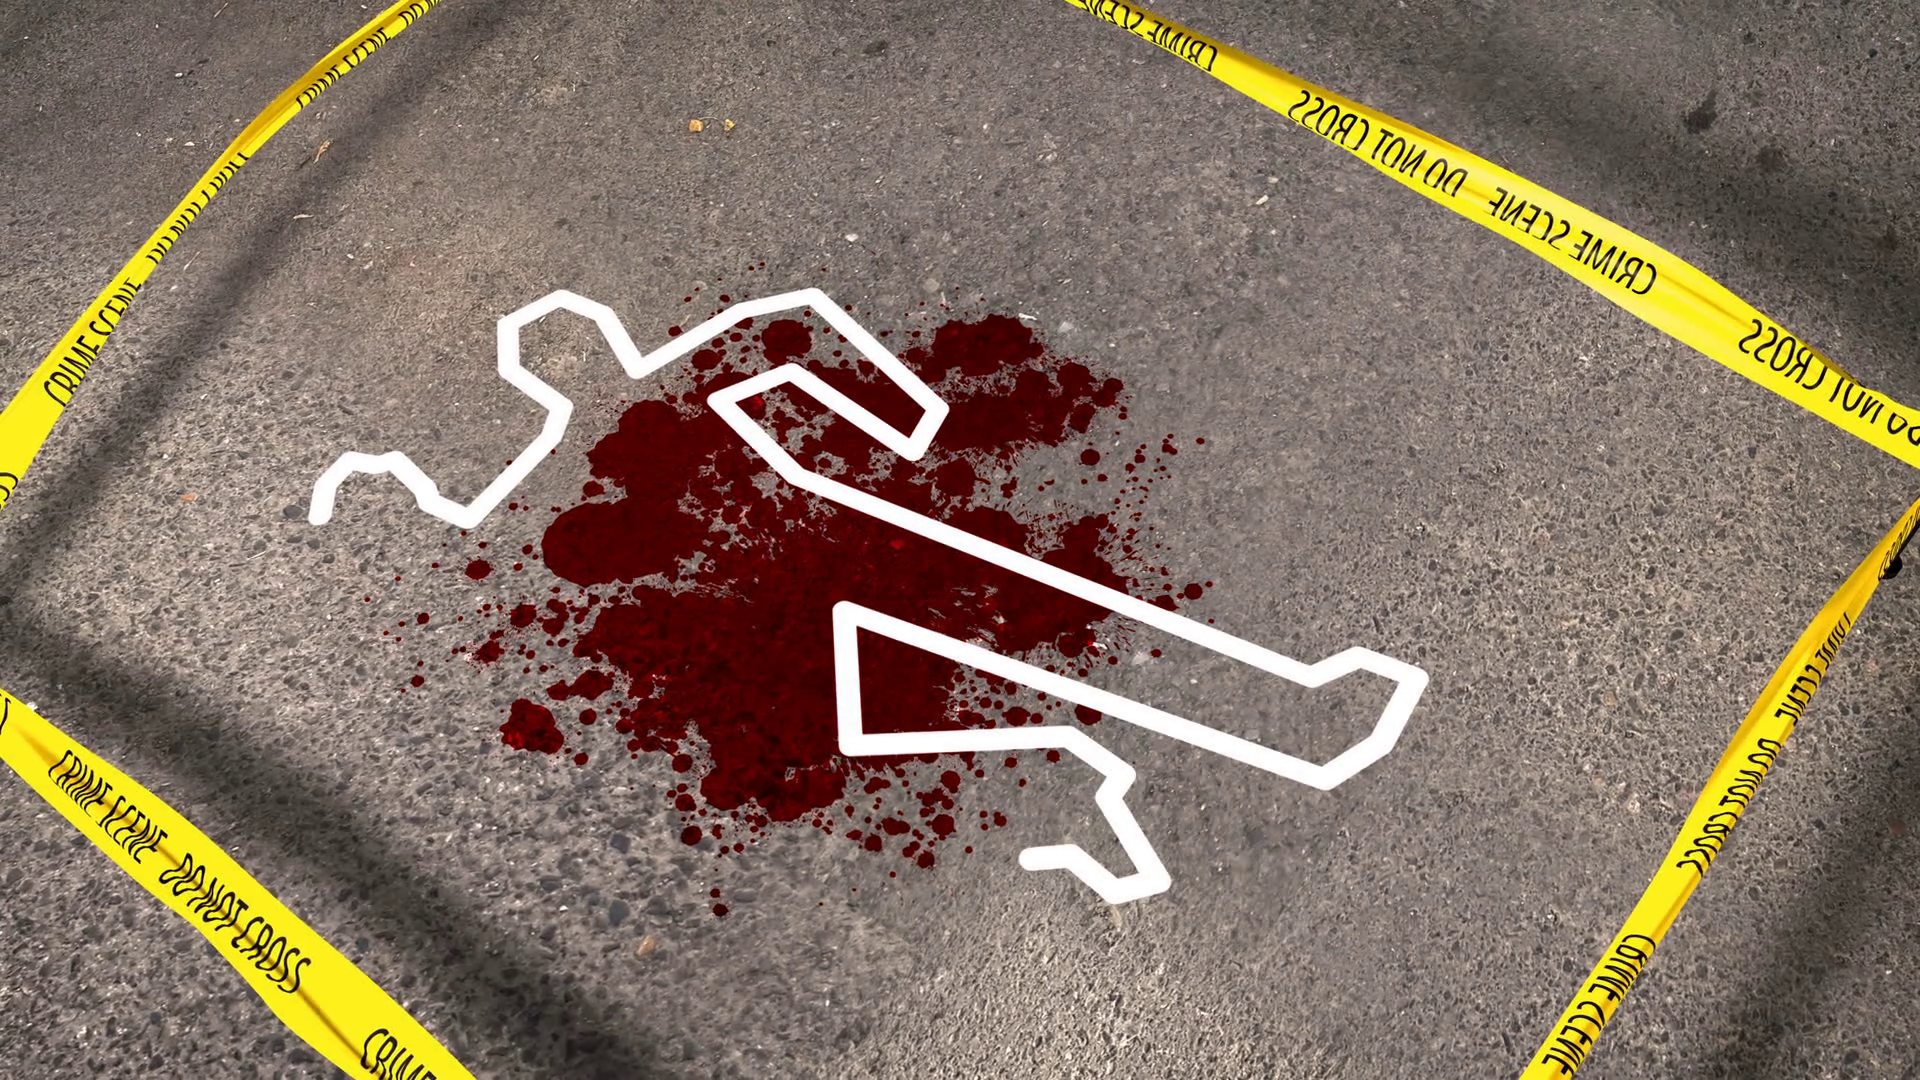 Do Not Cross Tape Around A Crime Scene With A Blood Spot And A Human Body Contour. Motion Background   Videoblocks - Crime Scene, Transparent background PNG HD thumbnail